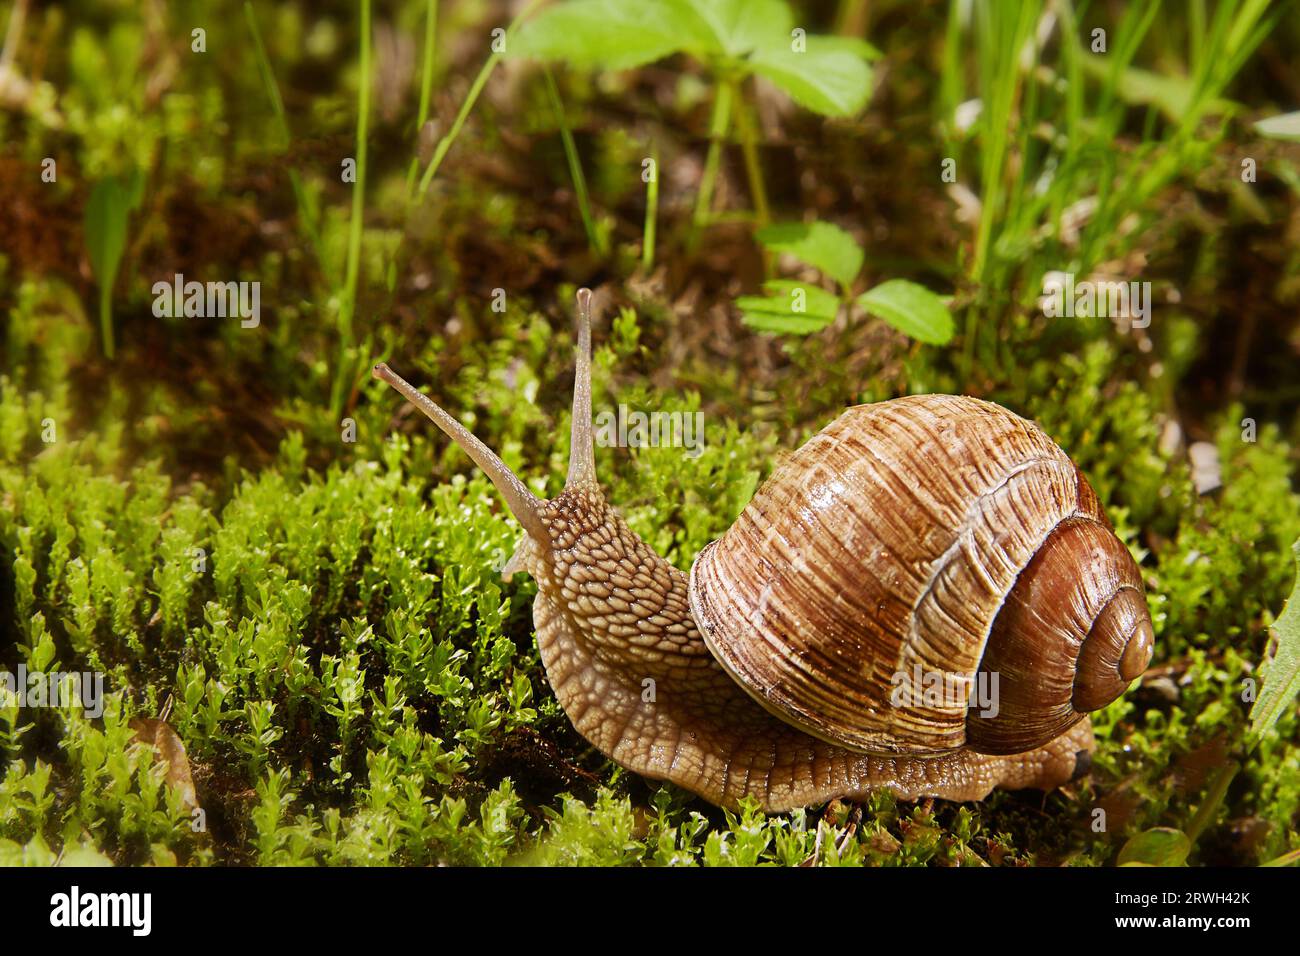 Helix pomatia or grape snail in its natural habitat, a Burgundy snail in nature in green moss. Edible snail of the Helicidae family. Copy space. Stock Photo